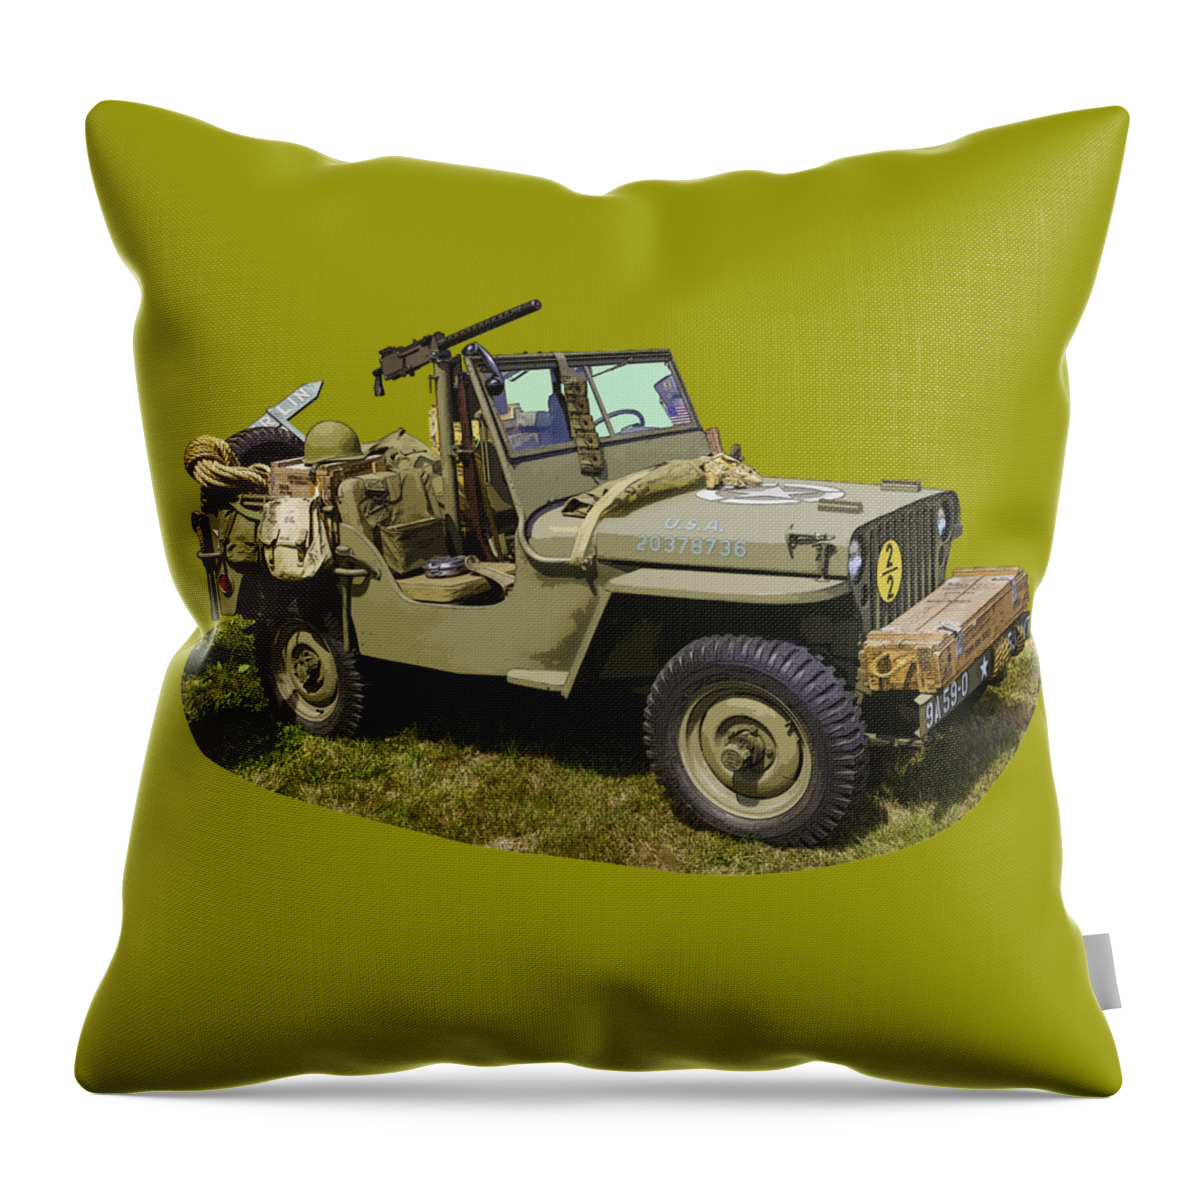 World War Two Throw Pillow featuring the photograph World War Two - Willys - Army Jeep by Keith Webber Jr